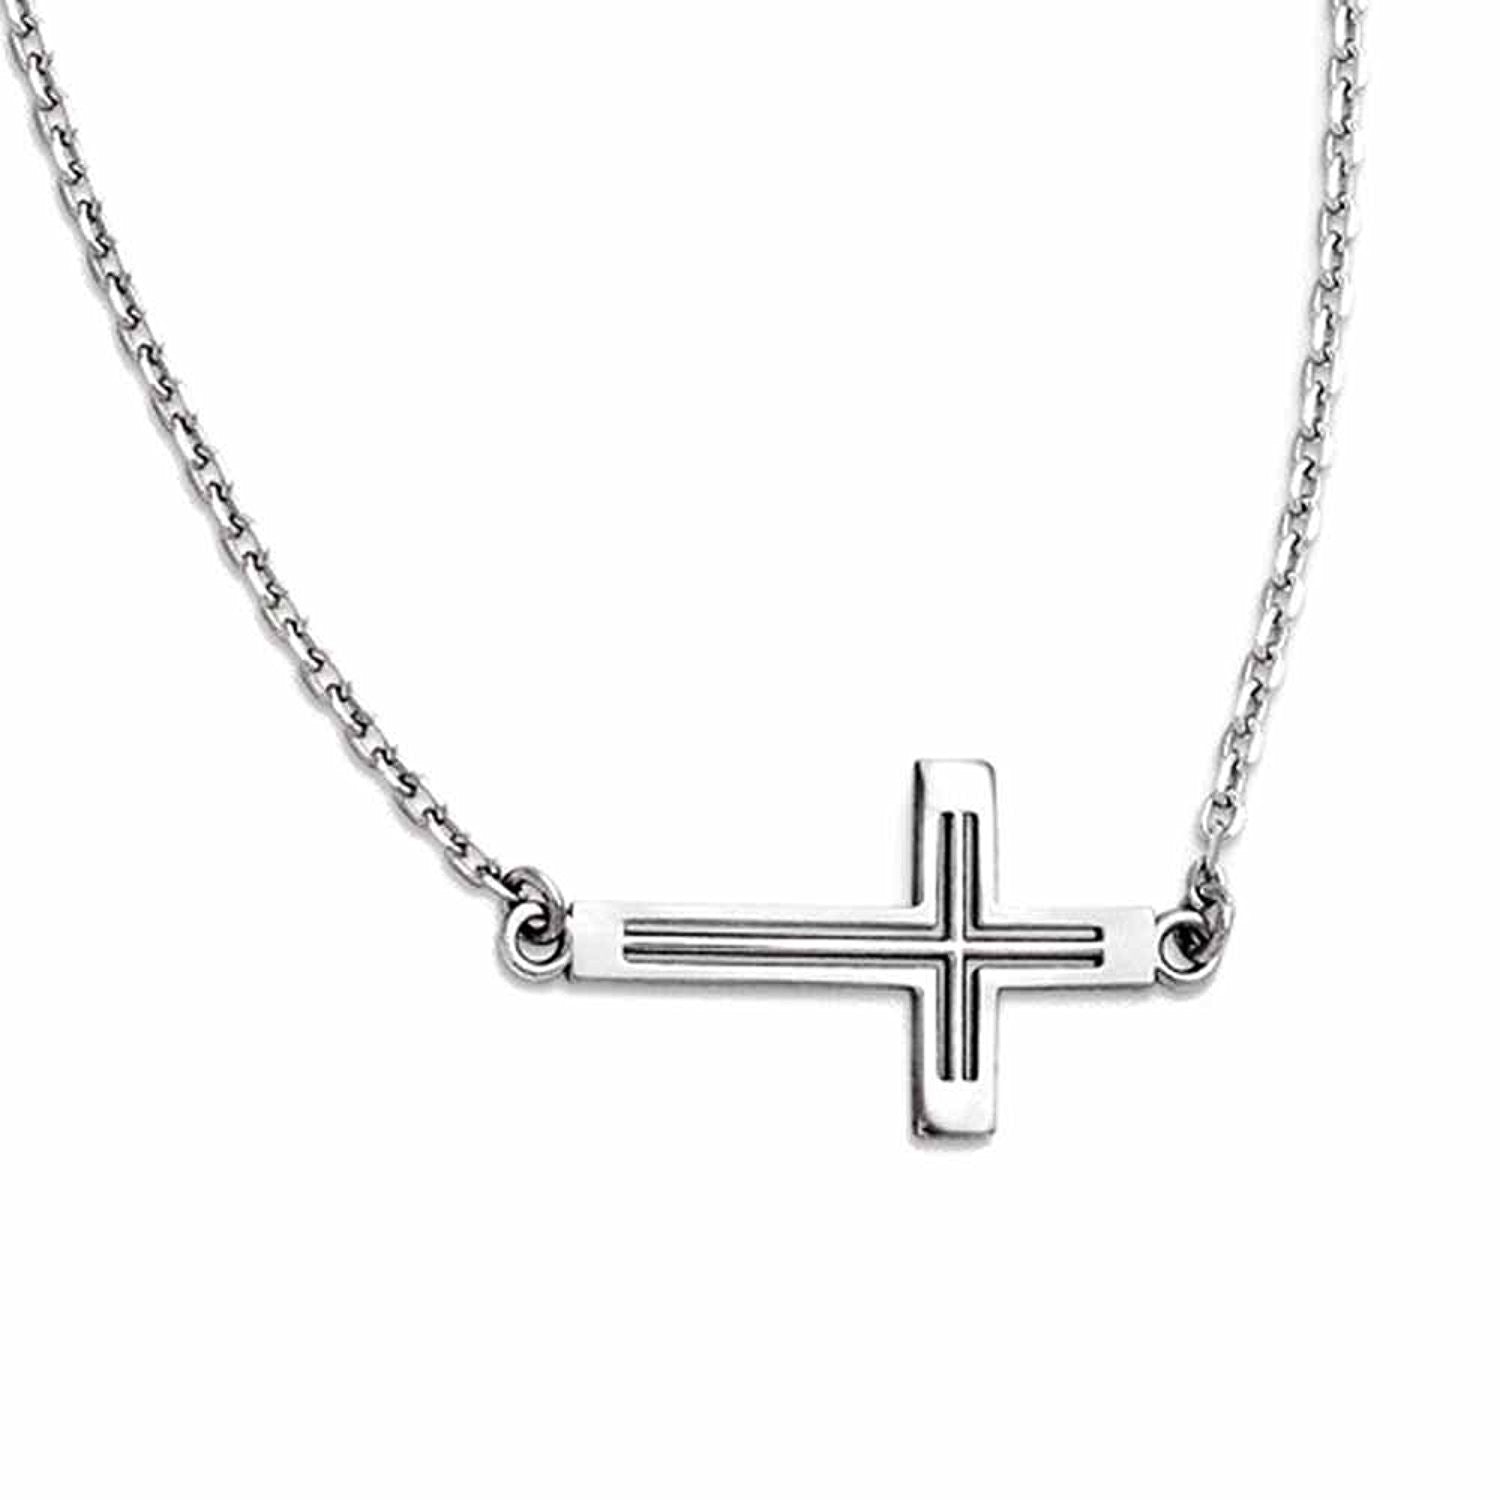 14k White Gold Sideways Cut Out Cross Necklace 19 Inches